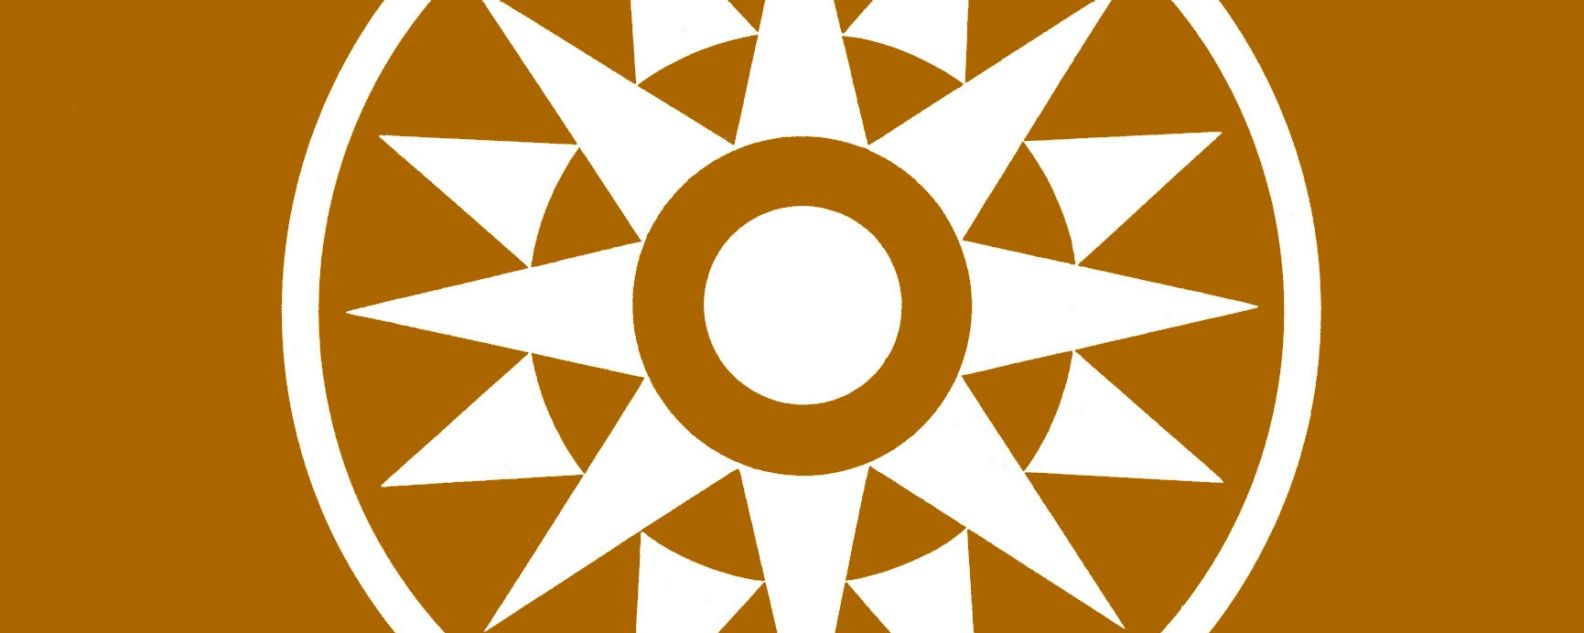 The iconic IBM 360 compass brand mark, resembling a stylized sun surrounded by rays